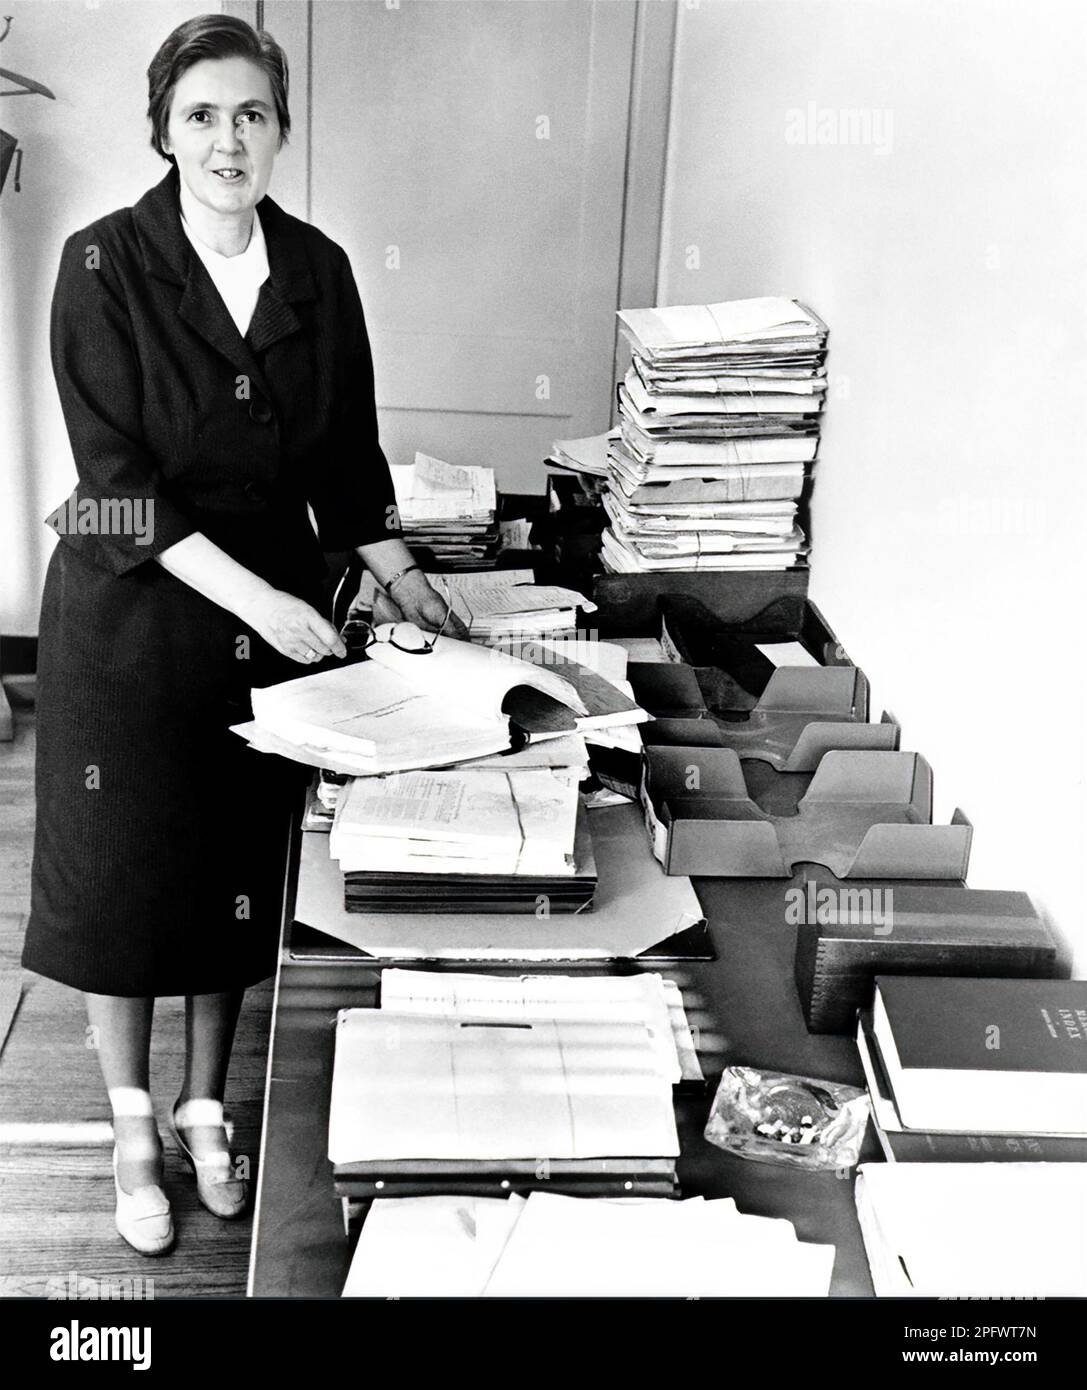 Dr. Frances Oldham Kelsey (1914-2015), a pharmacologist, physician, and FDA drug reviewer who refused to authorize Richardson-Merrell's Kevadon (thalidomide) and thus saved untold numbers of American children from serious birth defects, such as being born armless or legless. Kelsey was awarded the President's Award for Distinguished Federal Civilian Service by John F. Kennedy in 1962. Stock Photo